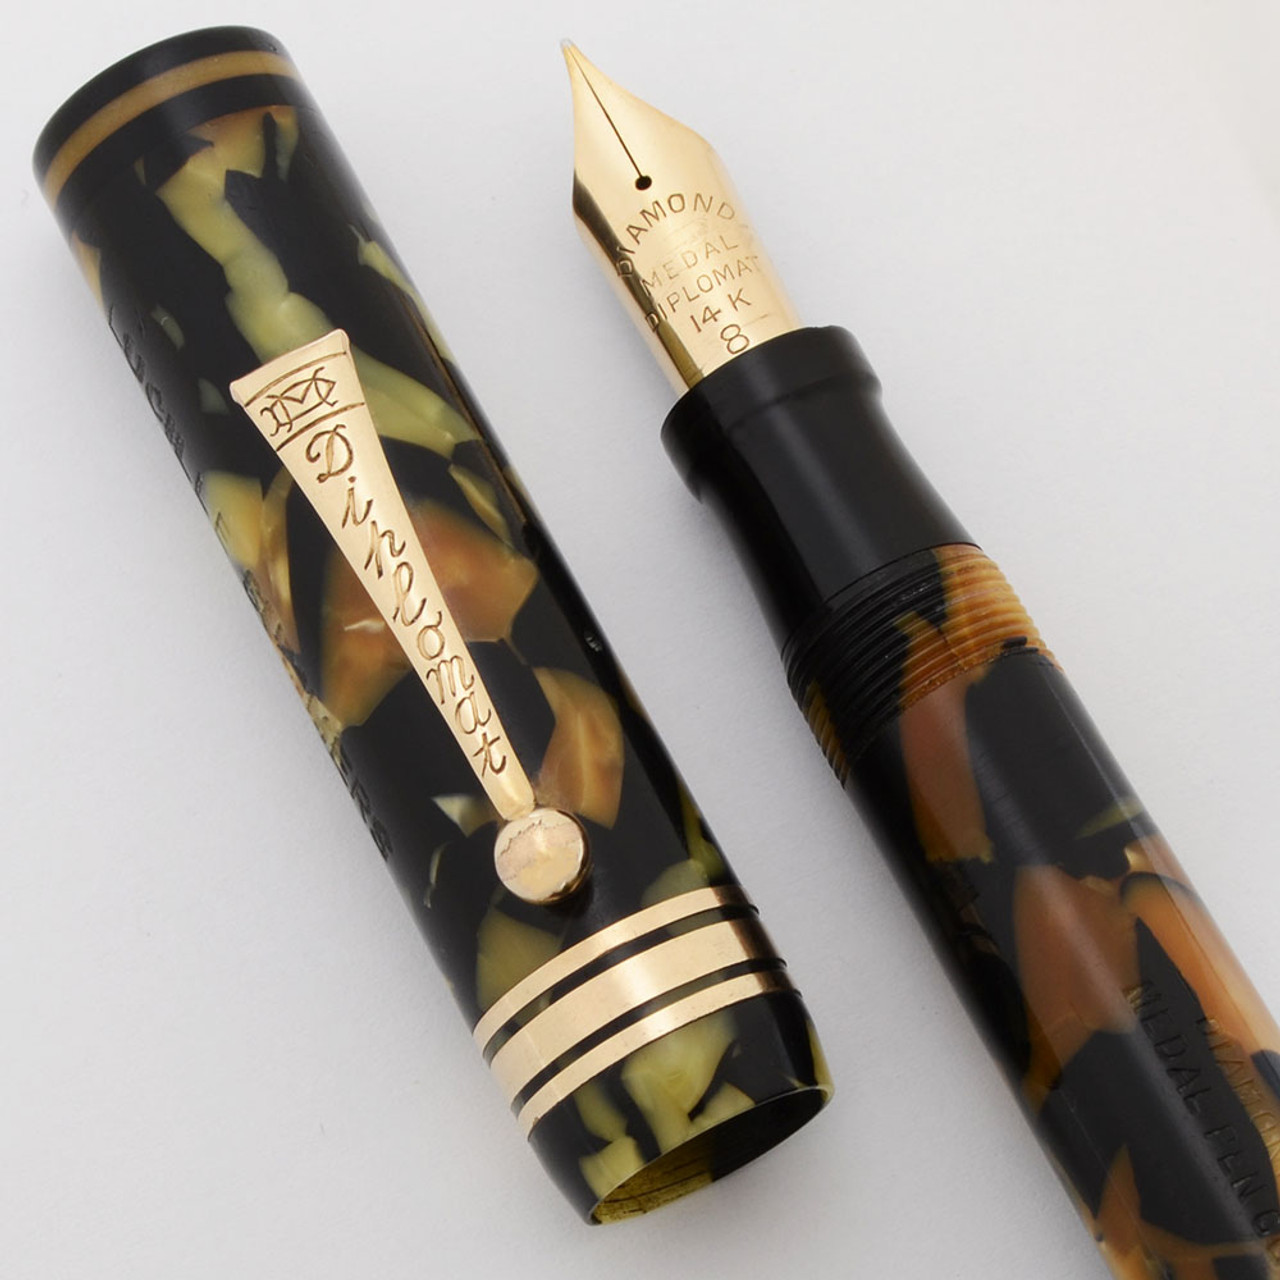 Diamond Medal Diplomat Fountain Pen (1930s) - Oversized, Black and Pearl, 14k #8 Fine Firm Nib (Excellent, Restored)